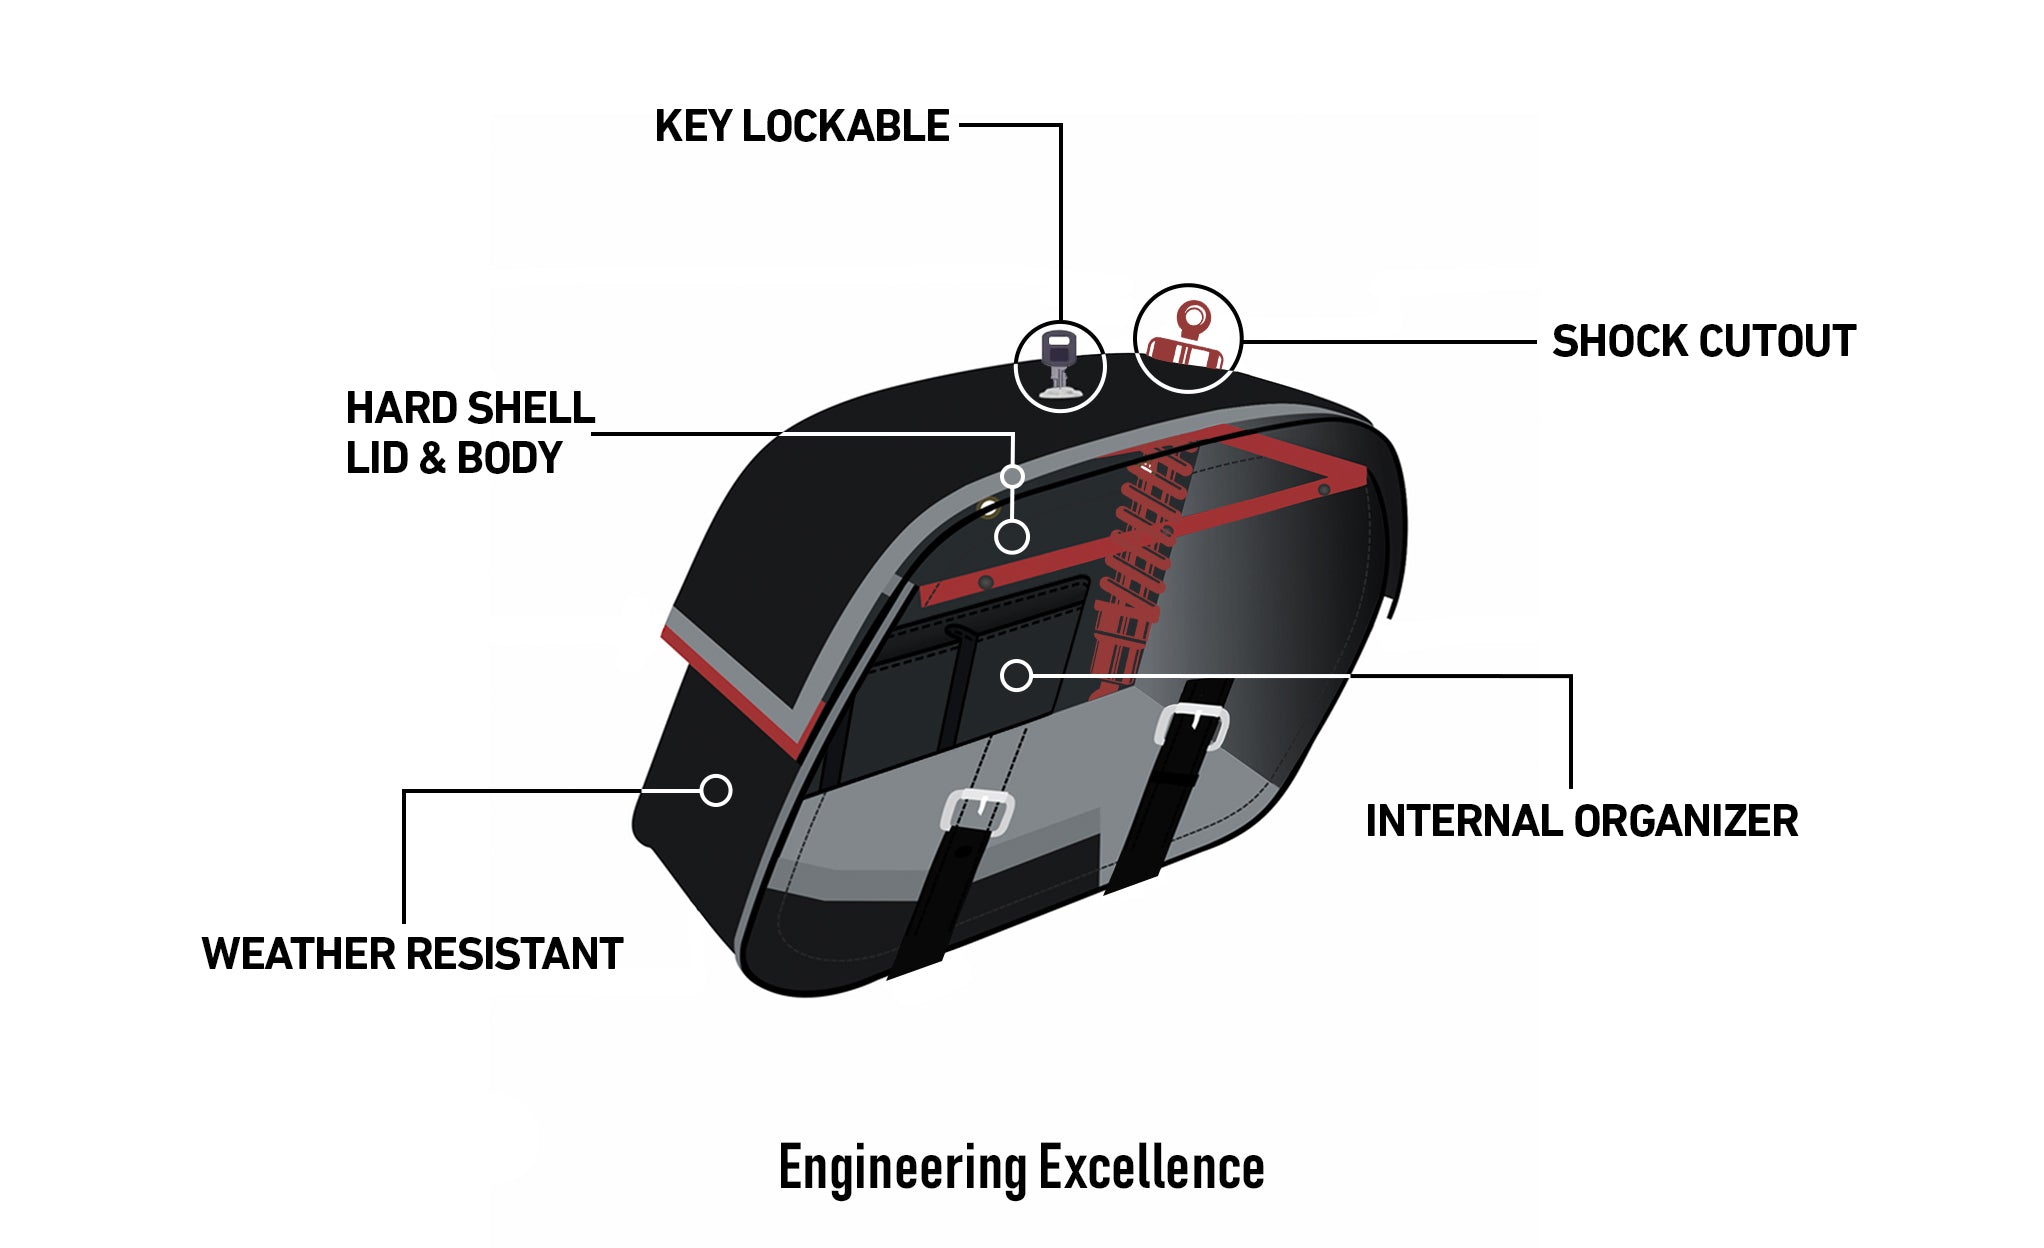 Viking Raven Extra Large Triumph Thunderbird 1700 Big Bore Shock Cut Out Leather Motorcycle Saddlebags Engineering Excellence with Bag on Bike @expand